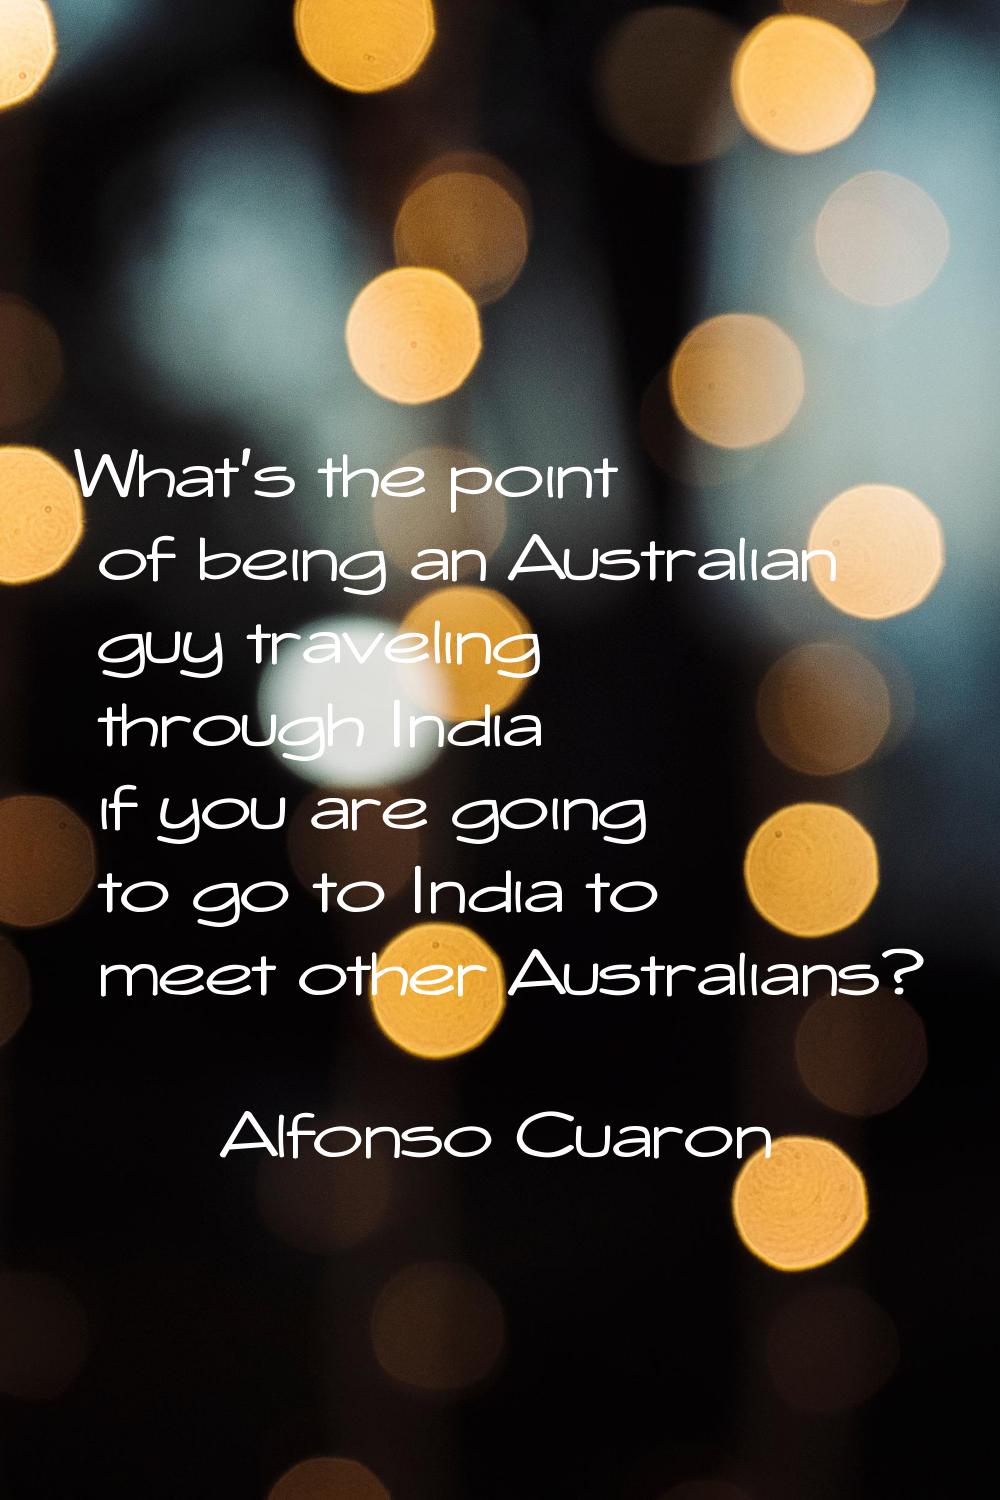 What's the point of being an Australian guy traveling through India if you are going to go to India